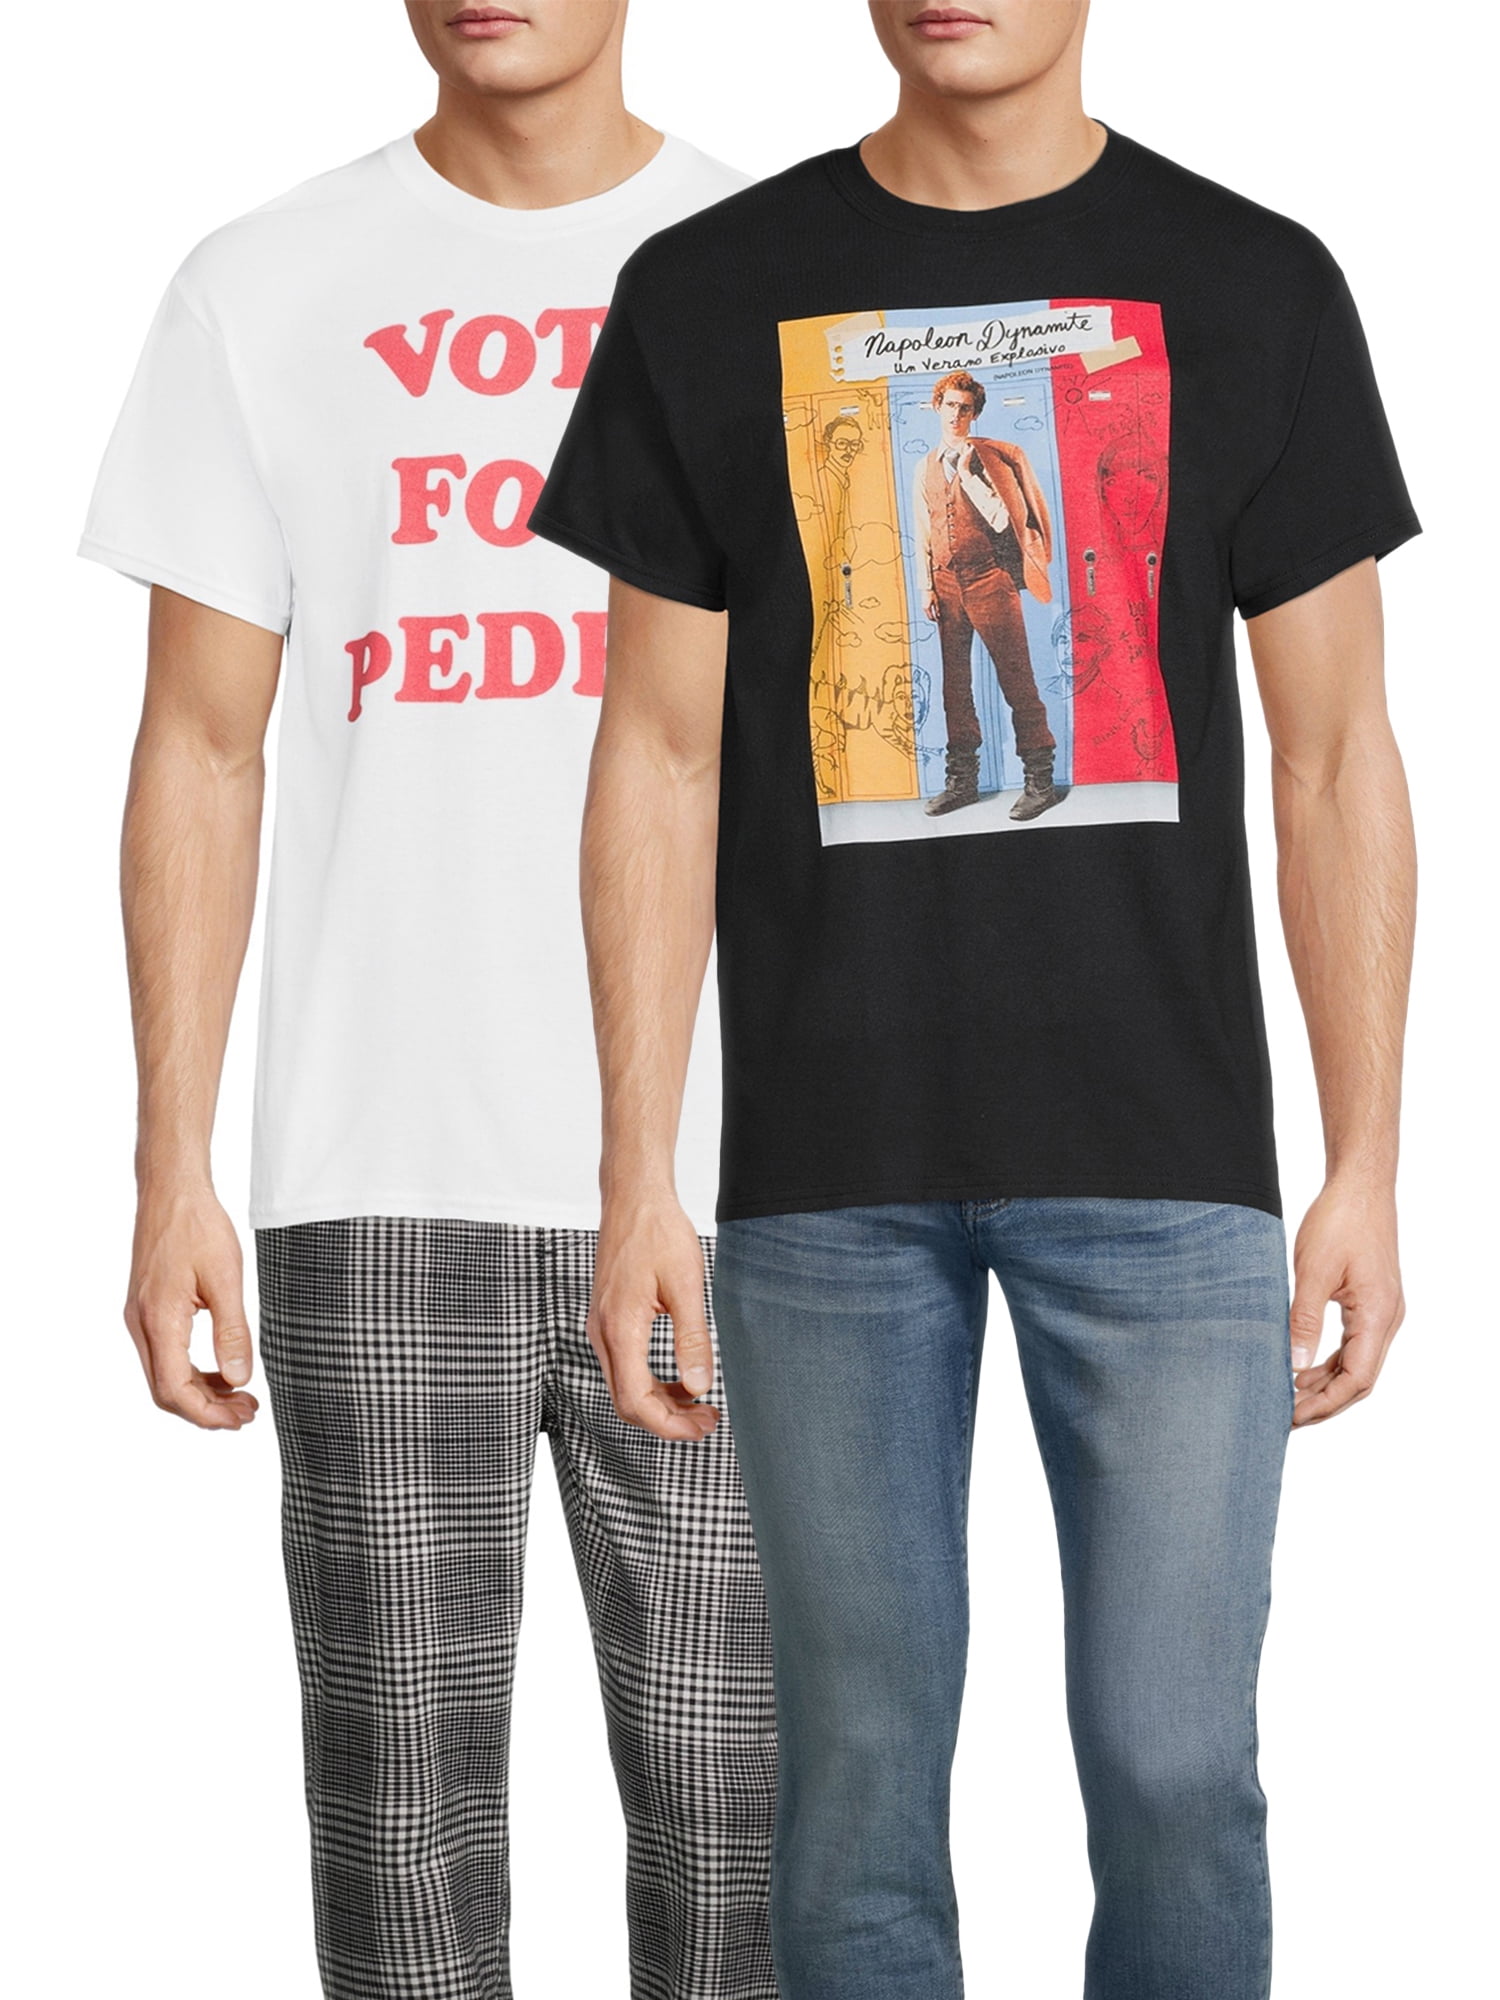 Napoleon Dynamite Chilling On The Couch Wearing Vote For Pedro Adult T Shirt 